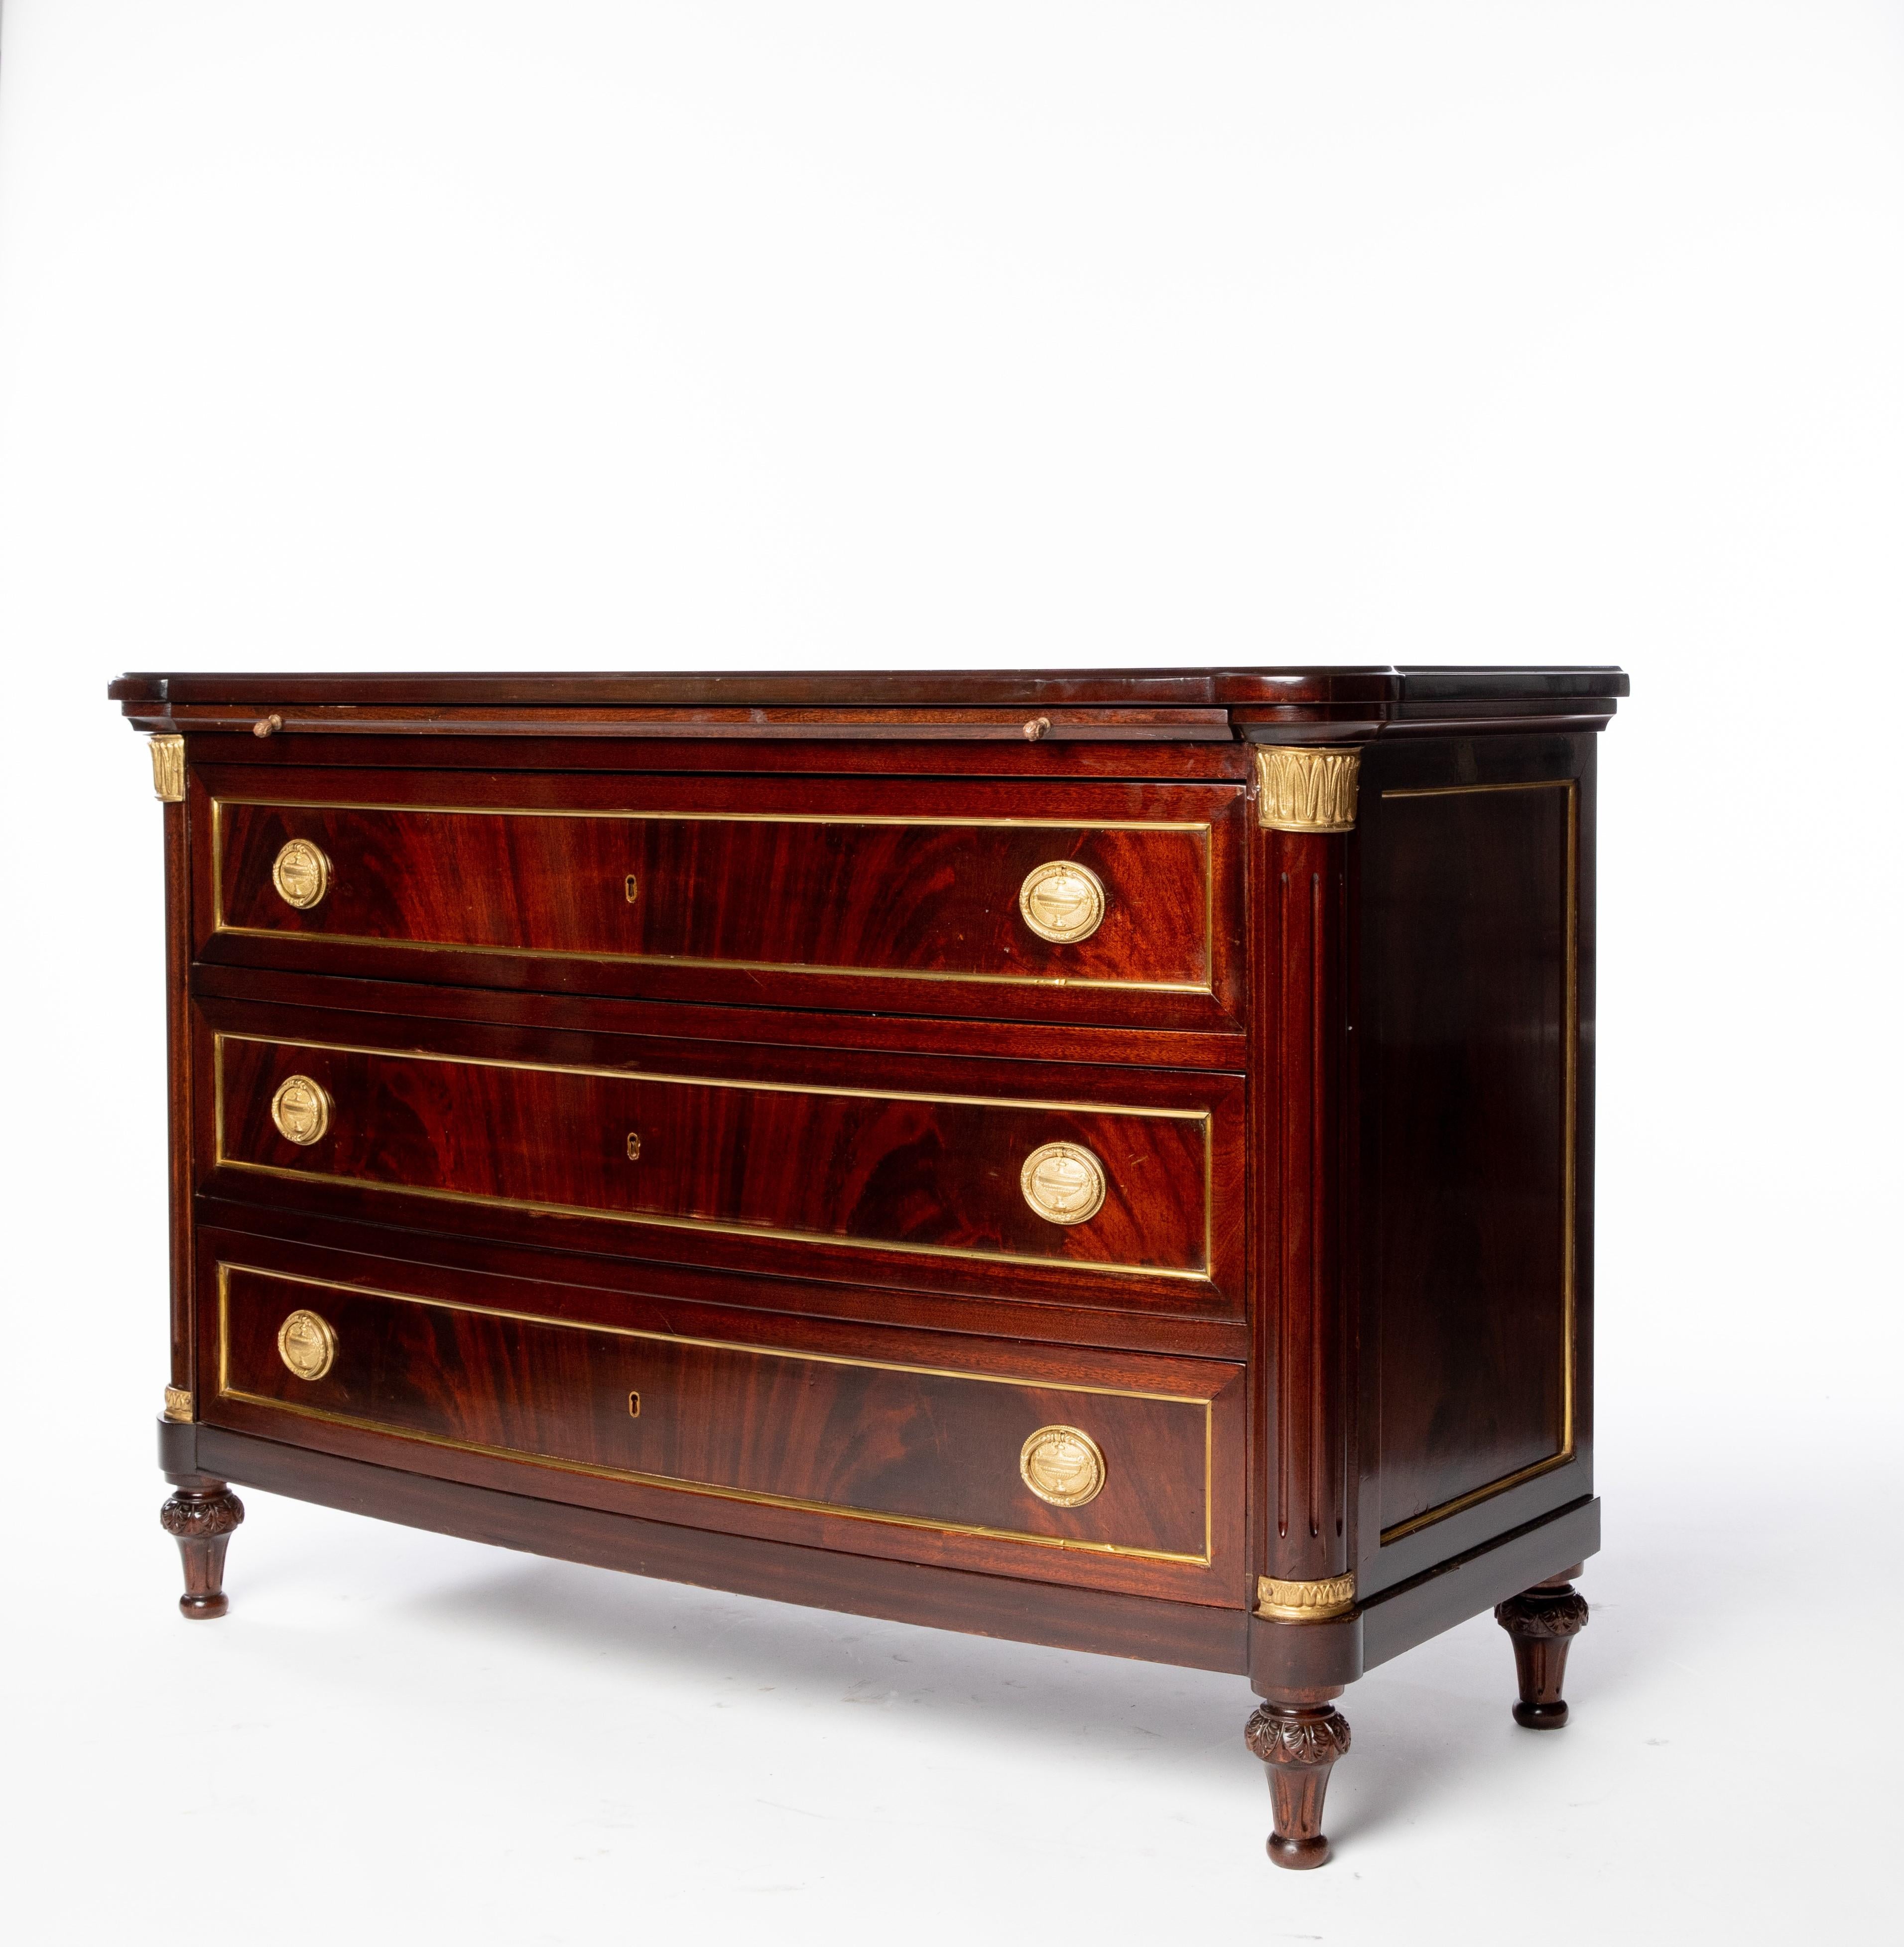 Empire style mahogany commode, early 20th c., bow front case fitted with pull-out leather brushing slide, over three drawers, flanked by fluted corner posts, rising on tapered legs.